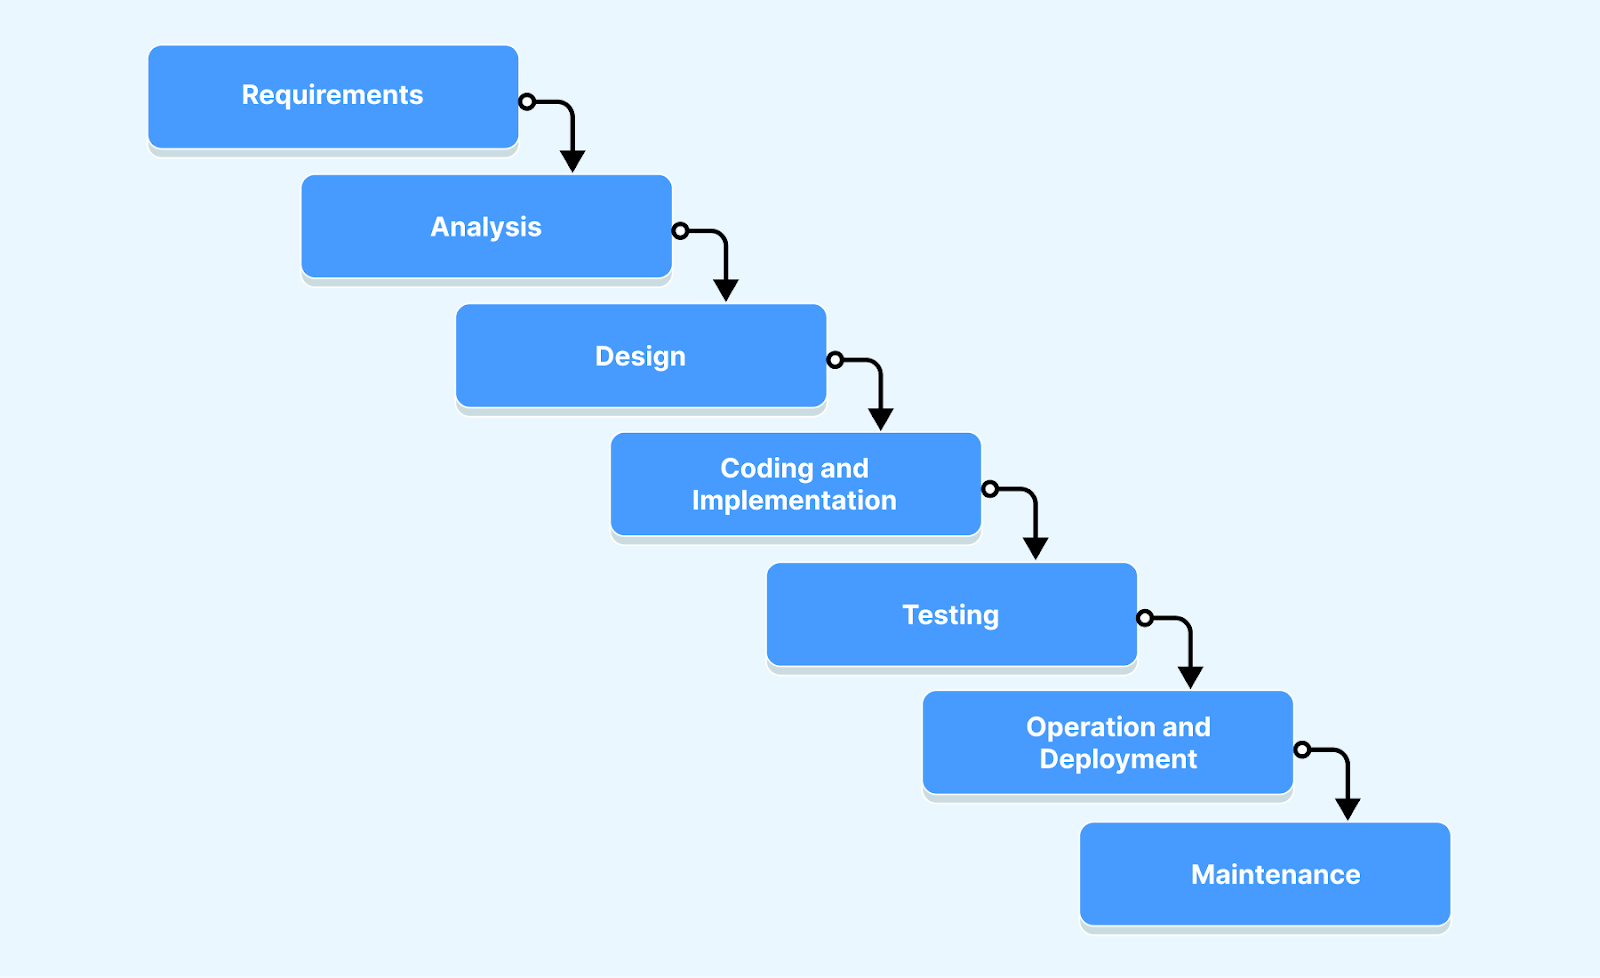 Phases of the Waterfall SDLC Model